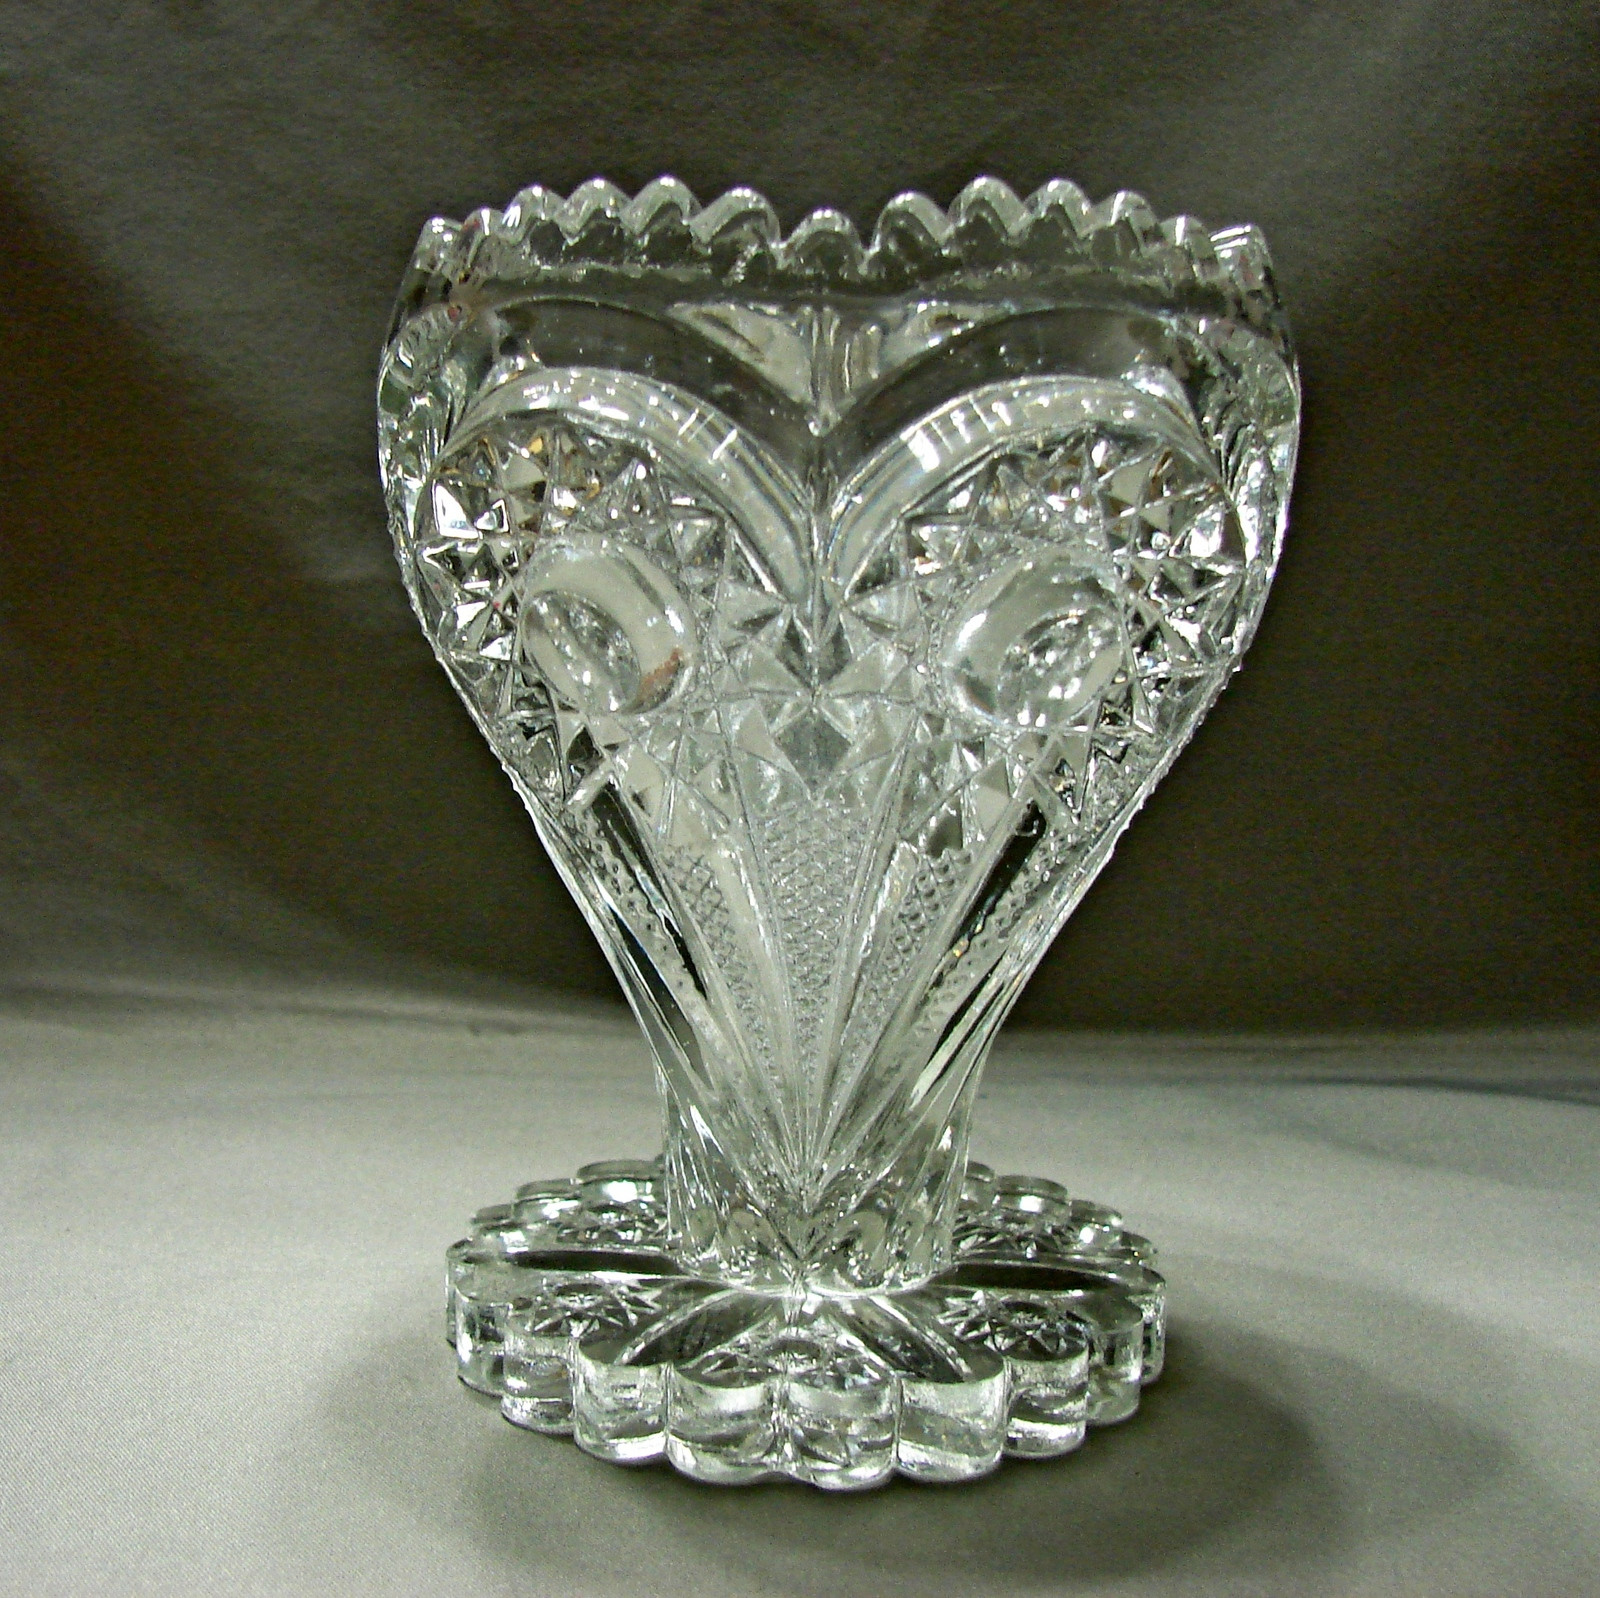 25 Stylish 10 Inch Clear Glass Vases 2024 free download 10 inch clear glass vases of eapg zippered heart glass vase antique and 10 similar items throughout eapg zippered heart glass vase antique imperial glass circa 1910